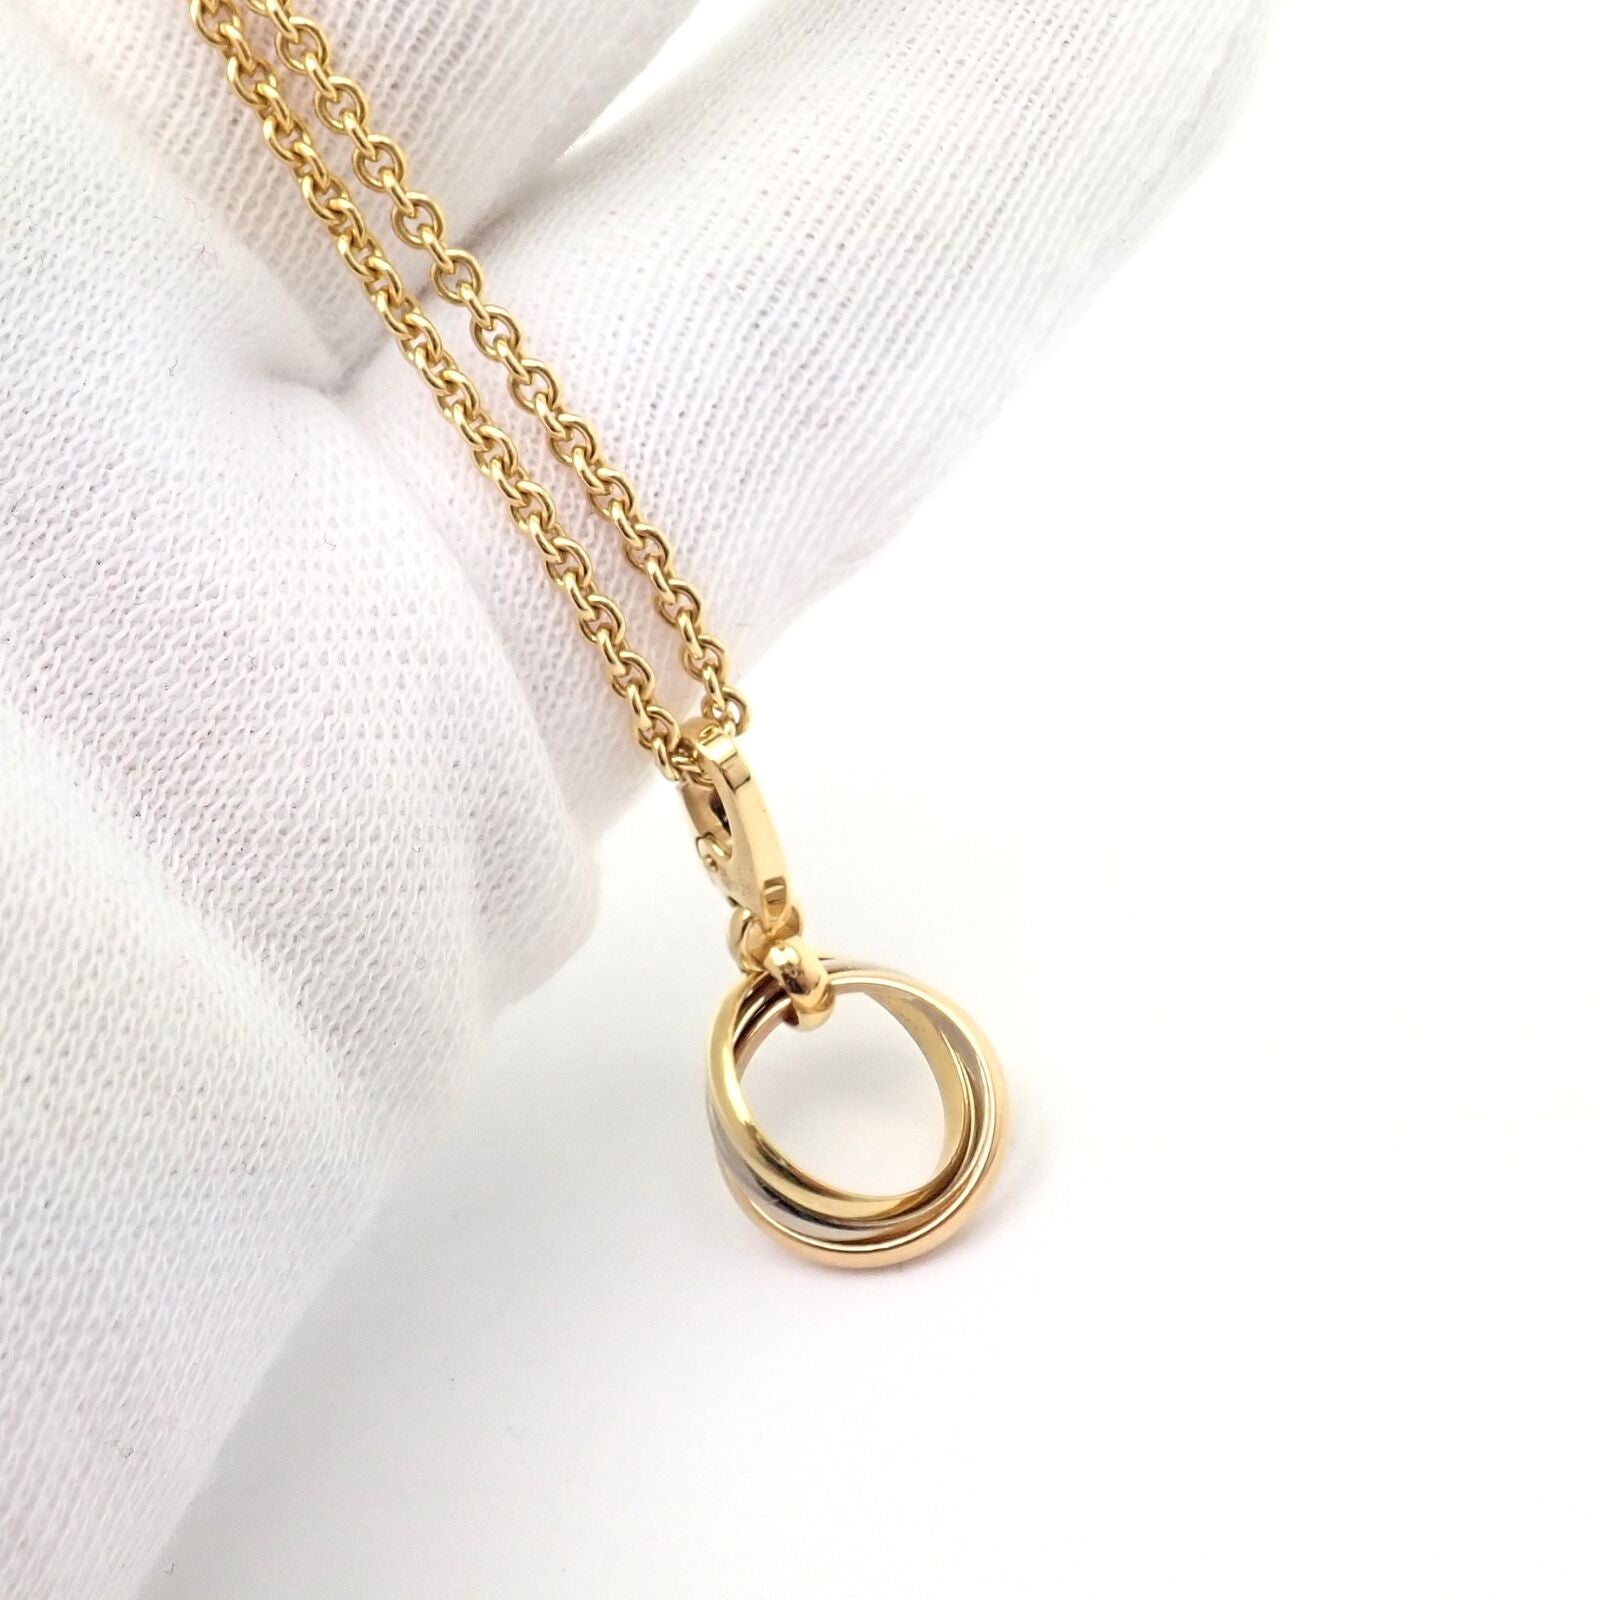 Cartier Jewelry & Watches:Fine Jewelry:Necklaces & Pendants Authentic! Cartier 18k Tricolor Gold Trinity Pendant Chain Necklace